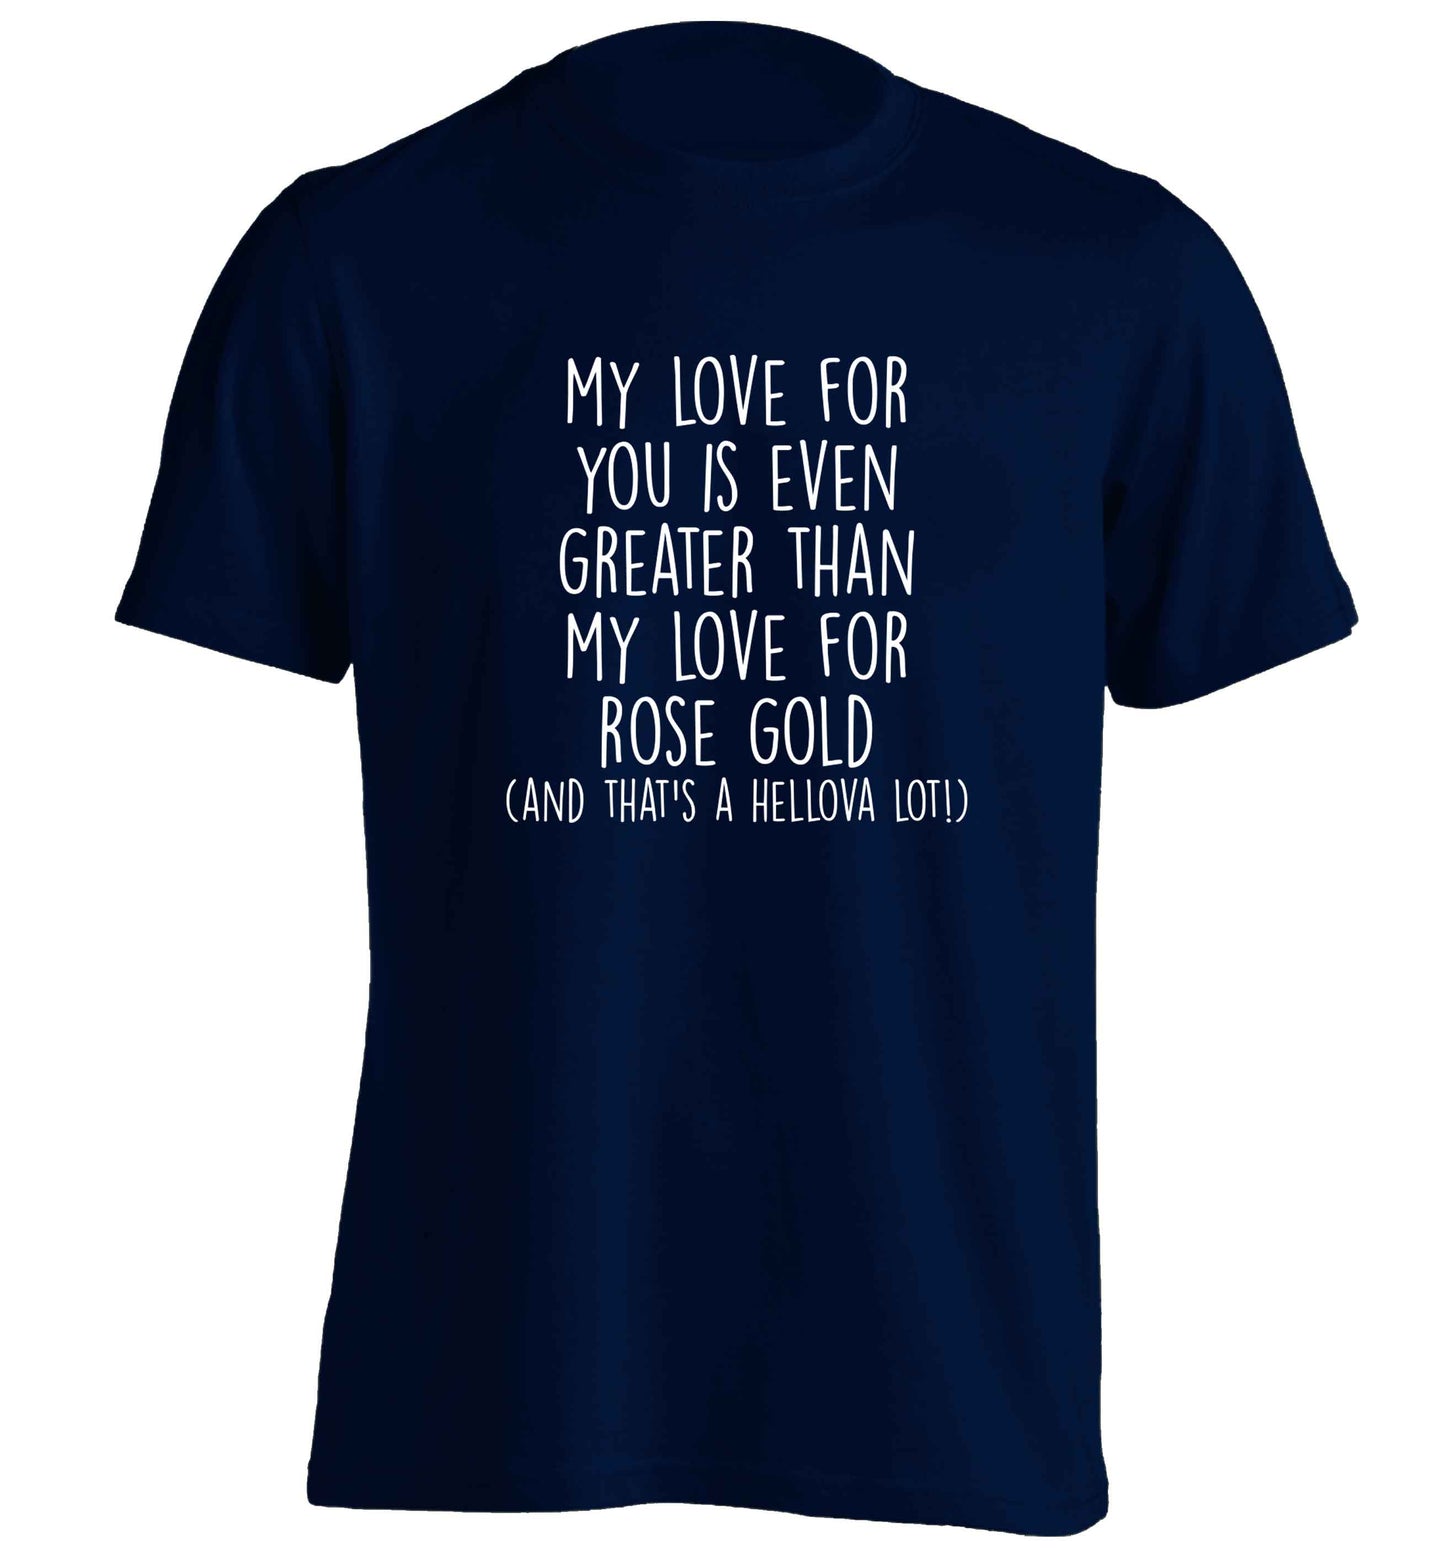 My love for you is even greater than my love for rose gold (and that's a hellova lot) adults unisex navy Tshirt 2XL